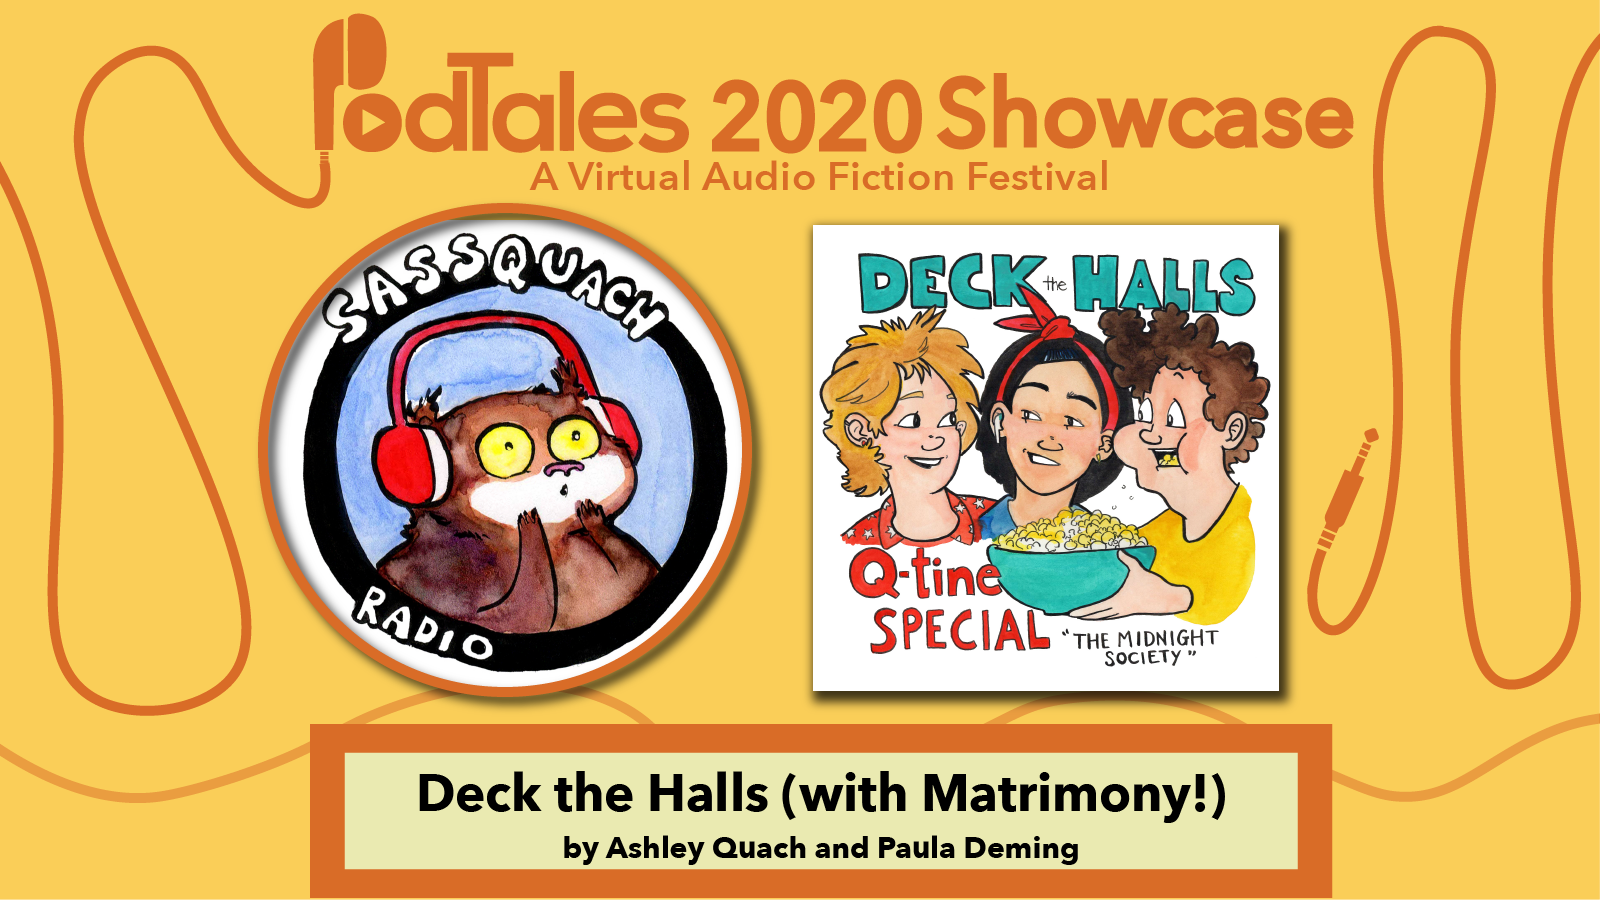 Text reading “PodTales 2020 Showcase: A Virtual Audio Fiction Festival”, Logo for Sasquach Radio, Show Art for Deck the Halls Q-tine Special “The Midnight Society”, Text reading “Deck the Halls (With Matrimony!) by Ashley Quach and Paula Deming”